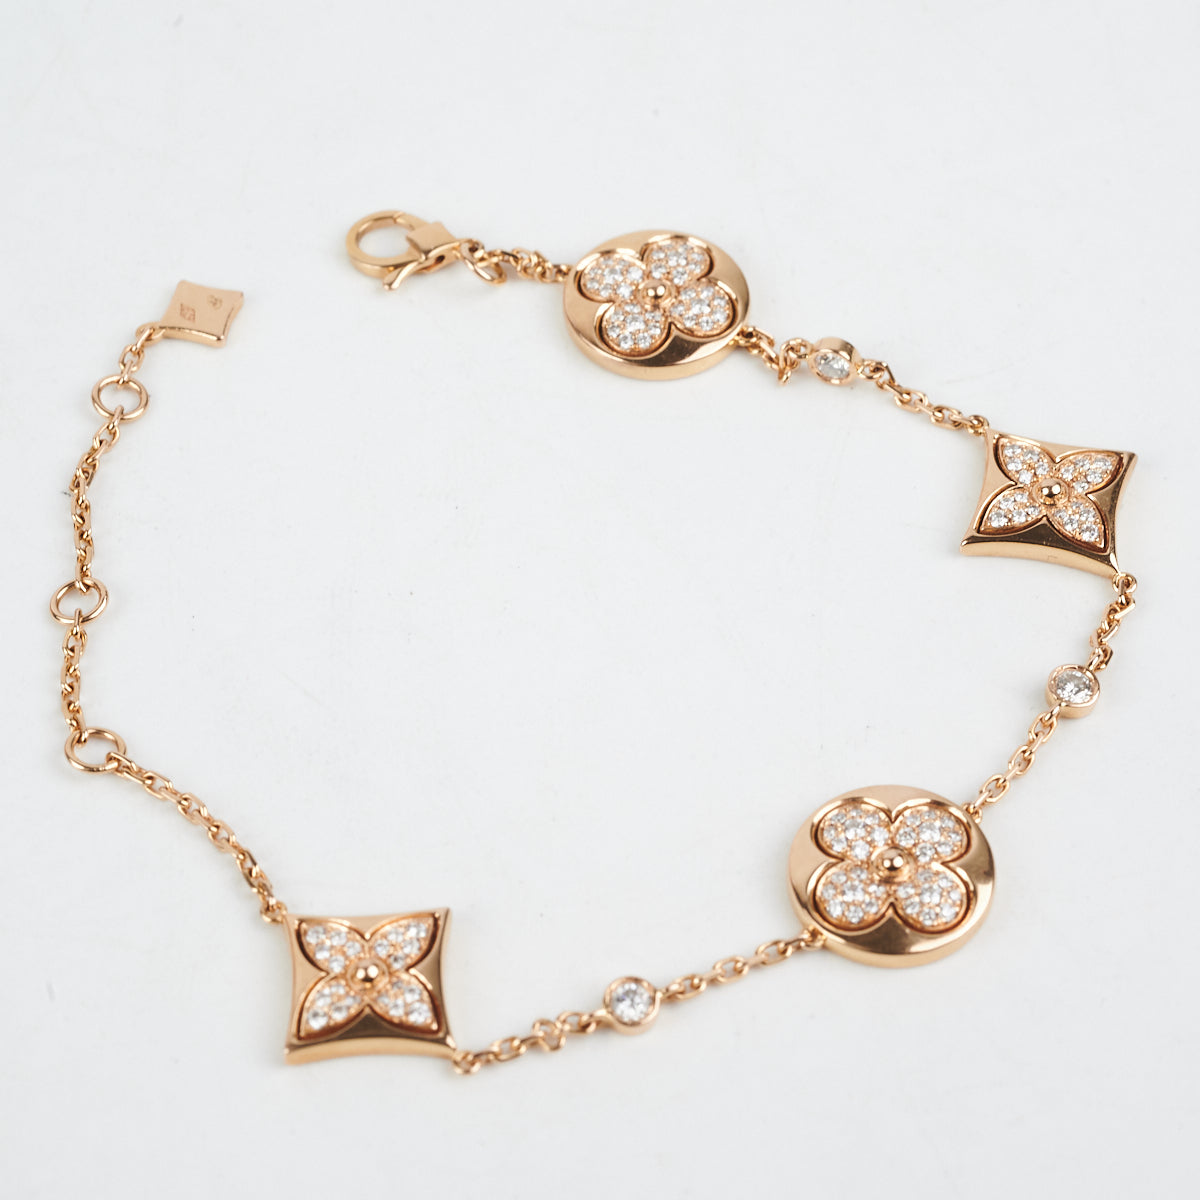 LOUIS VUITTON Idylle Blossom Bracelet, Pink Gold And Diamonds Pink Gold. Size Nsa